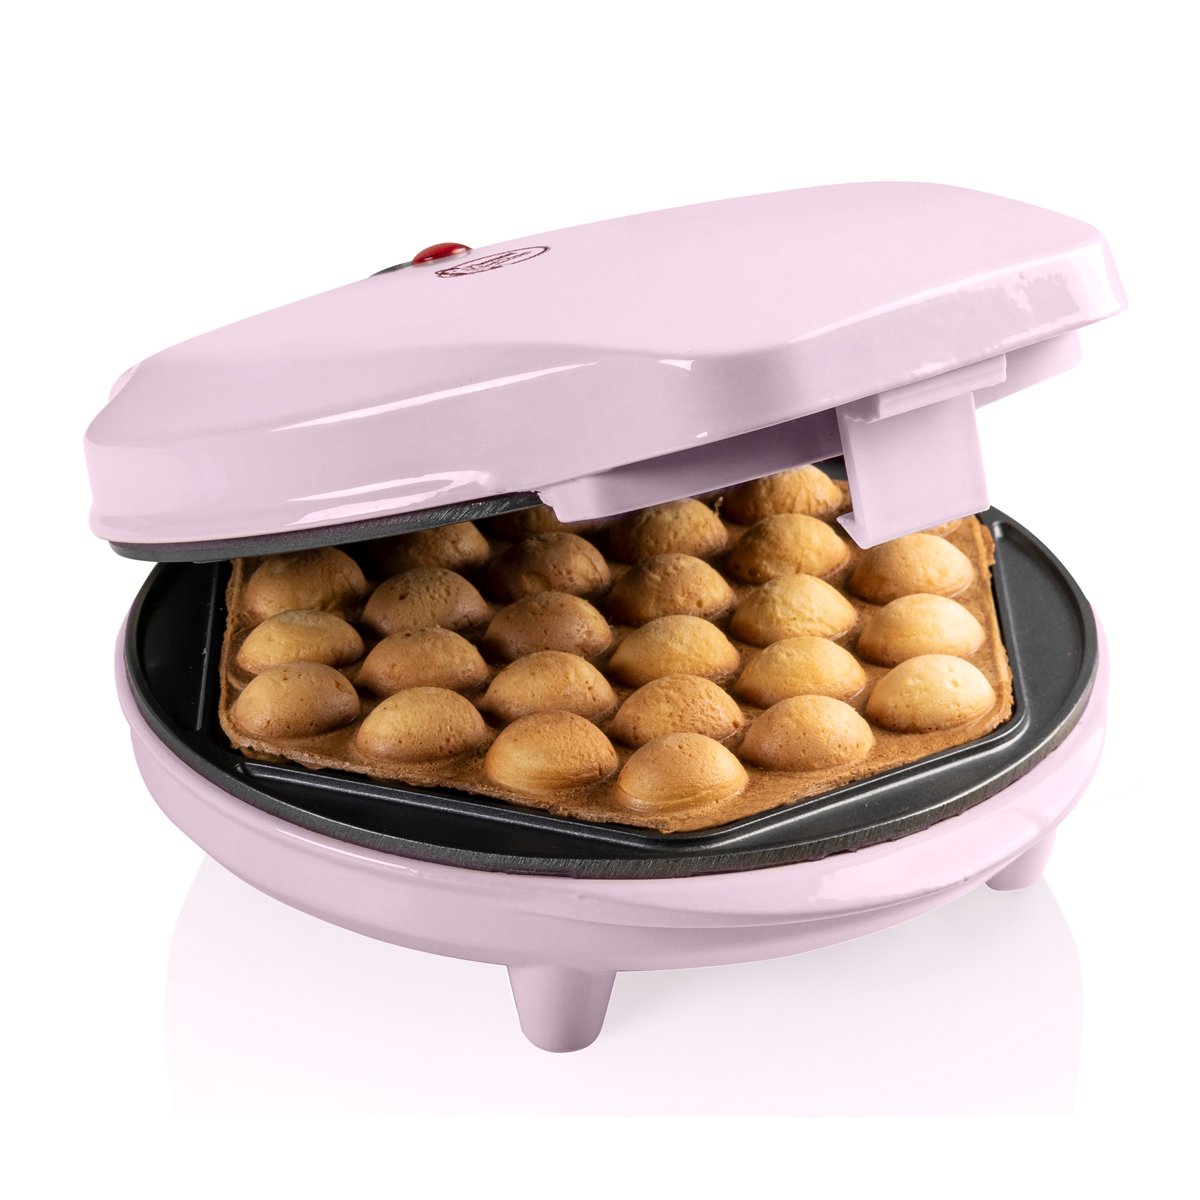 UNBOXING AND PRODUCT REVIEW MUFFIN MAKER MACHINE FROM BESTRON 